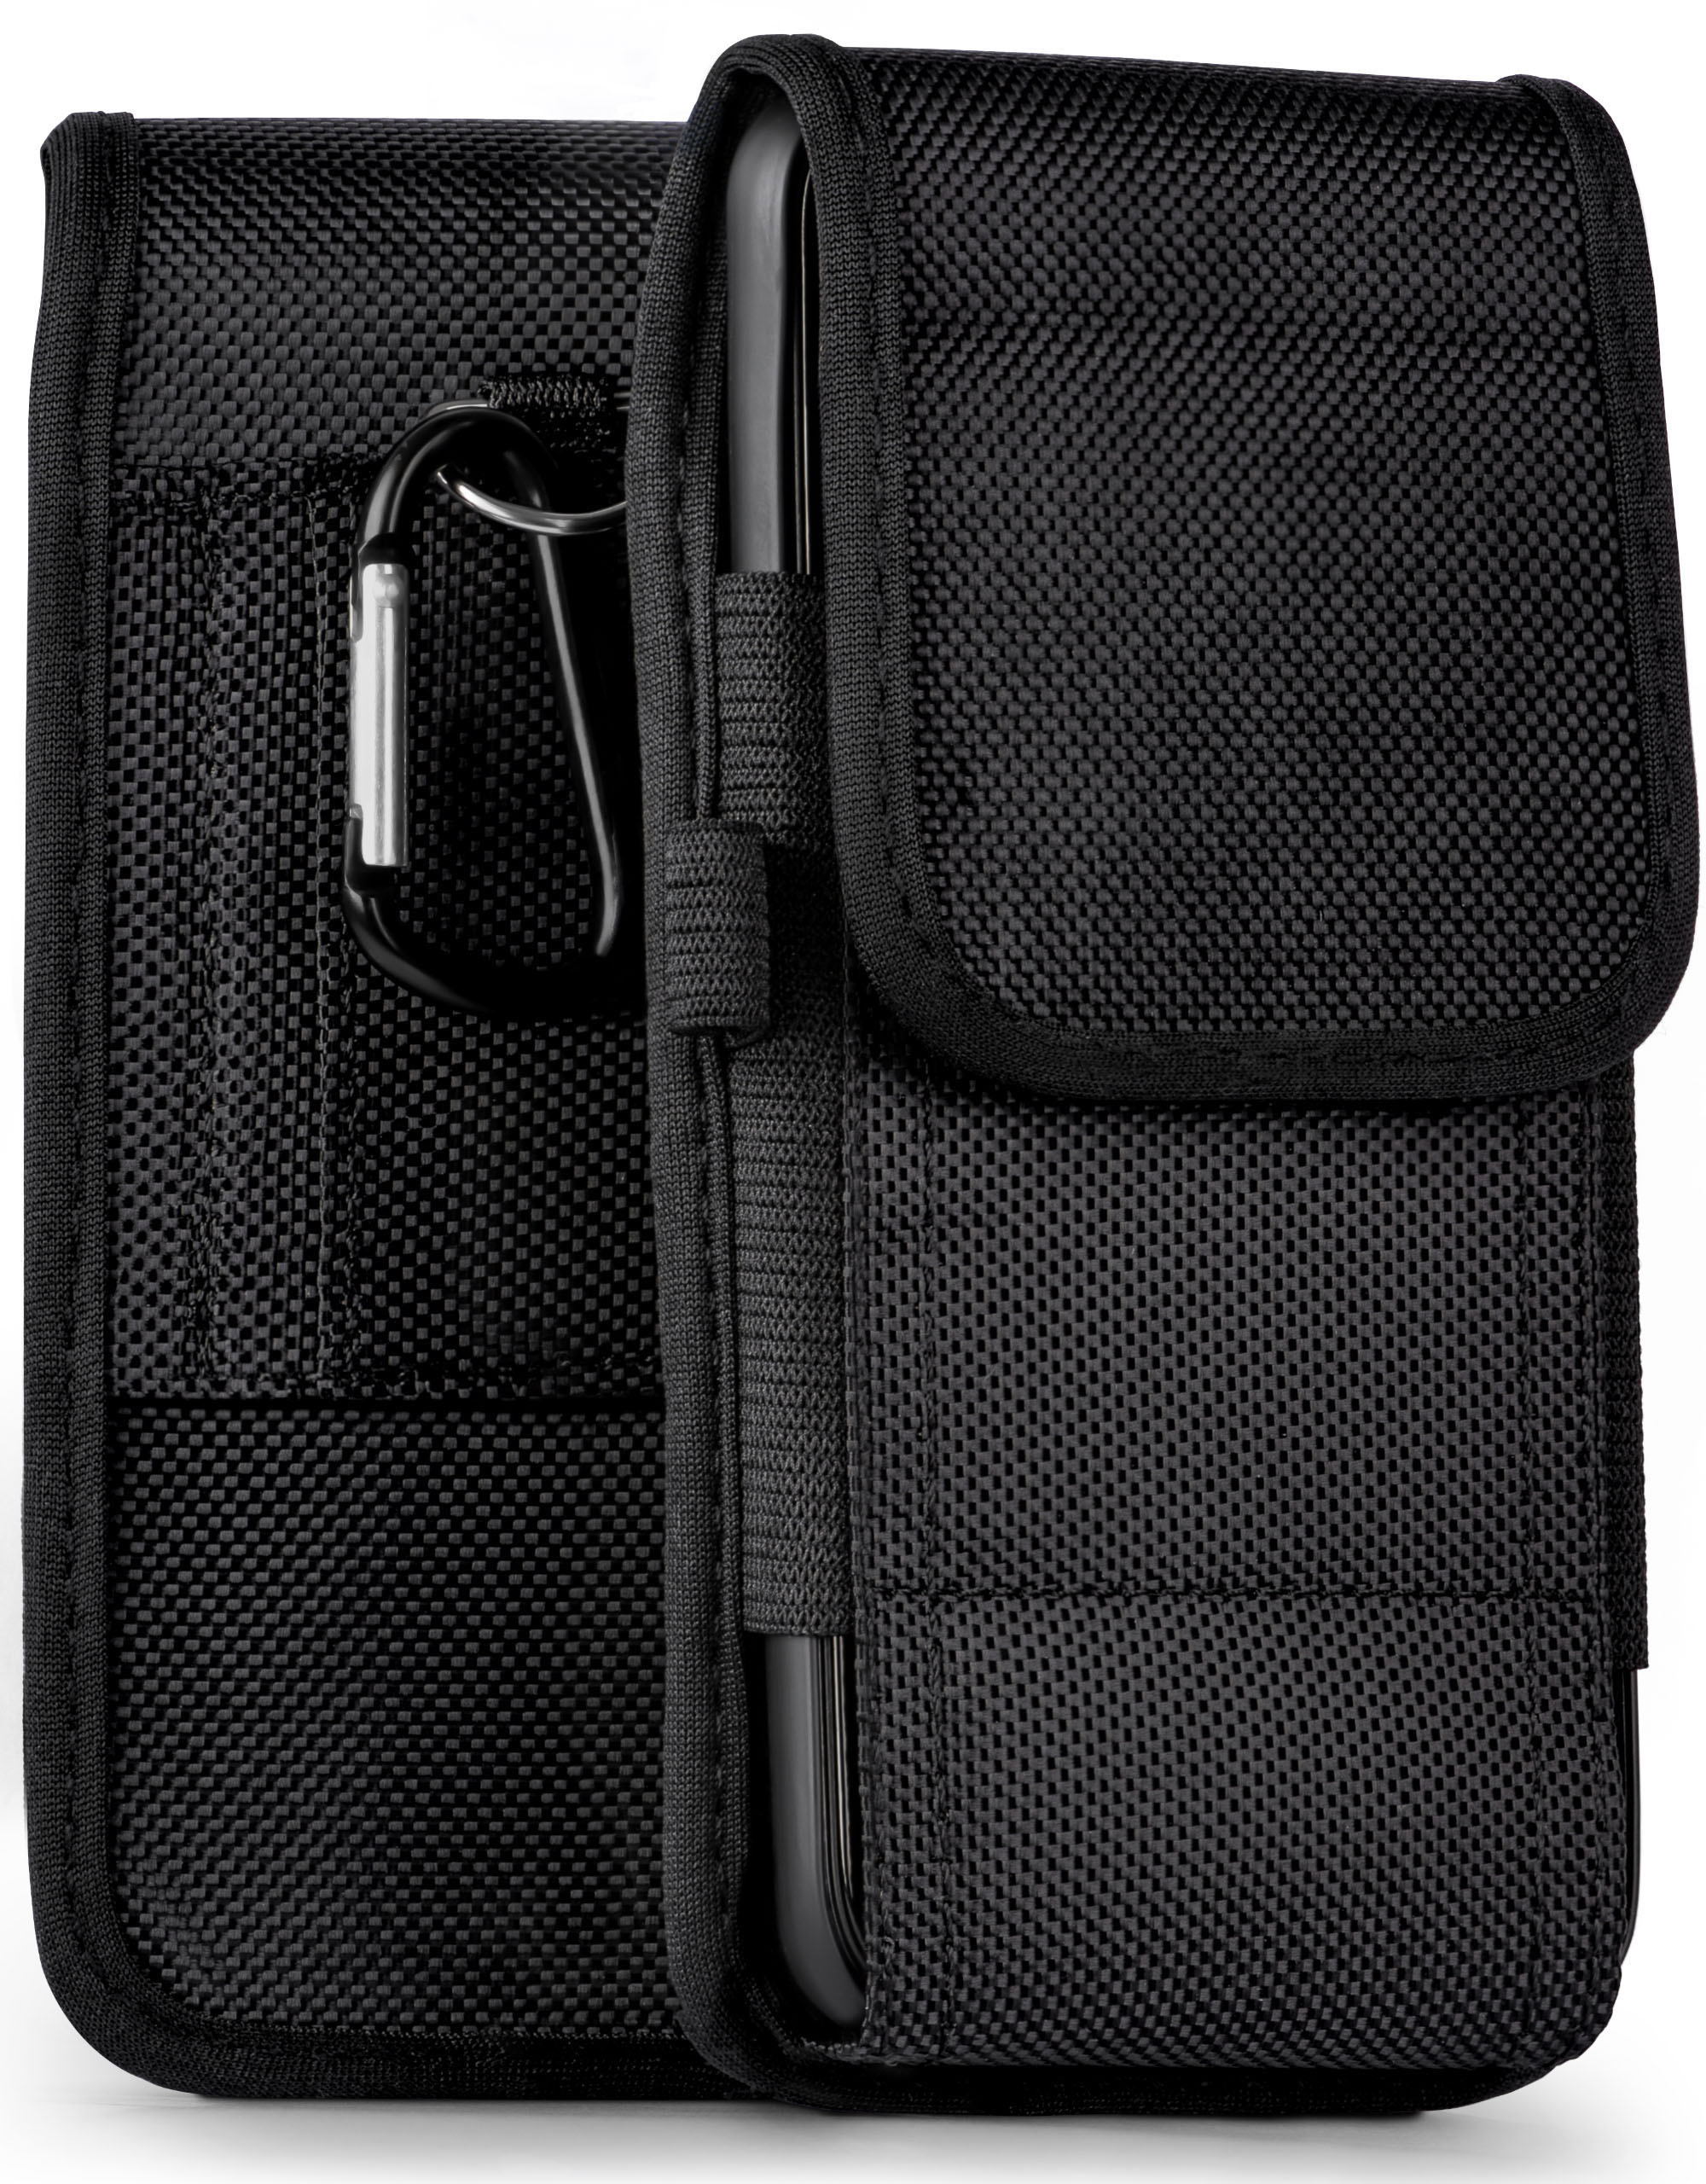 CAT, Case, Trail S42, Holster, Agility MOEX